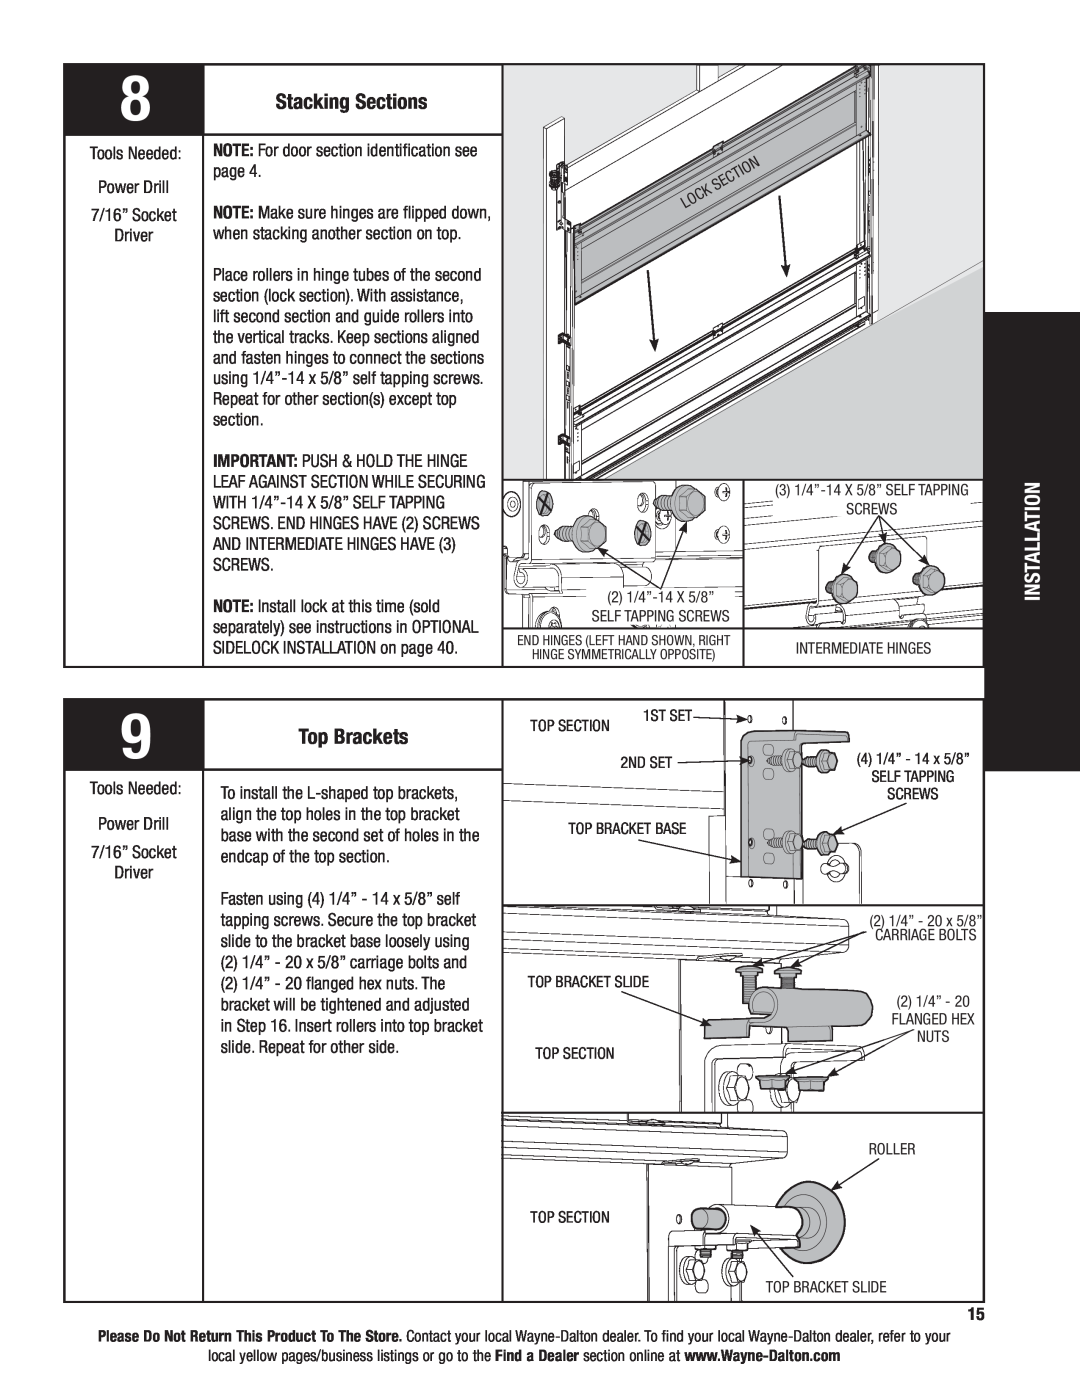 Wayne-Dalton AND 9600, 9400 installation instructions Stacking Sections, Top Brackets, 2 1/4”-14 X 5/8”, 4 1/4” - 14 x 5/8” 